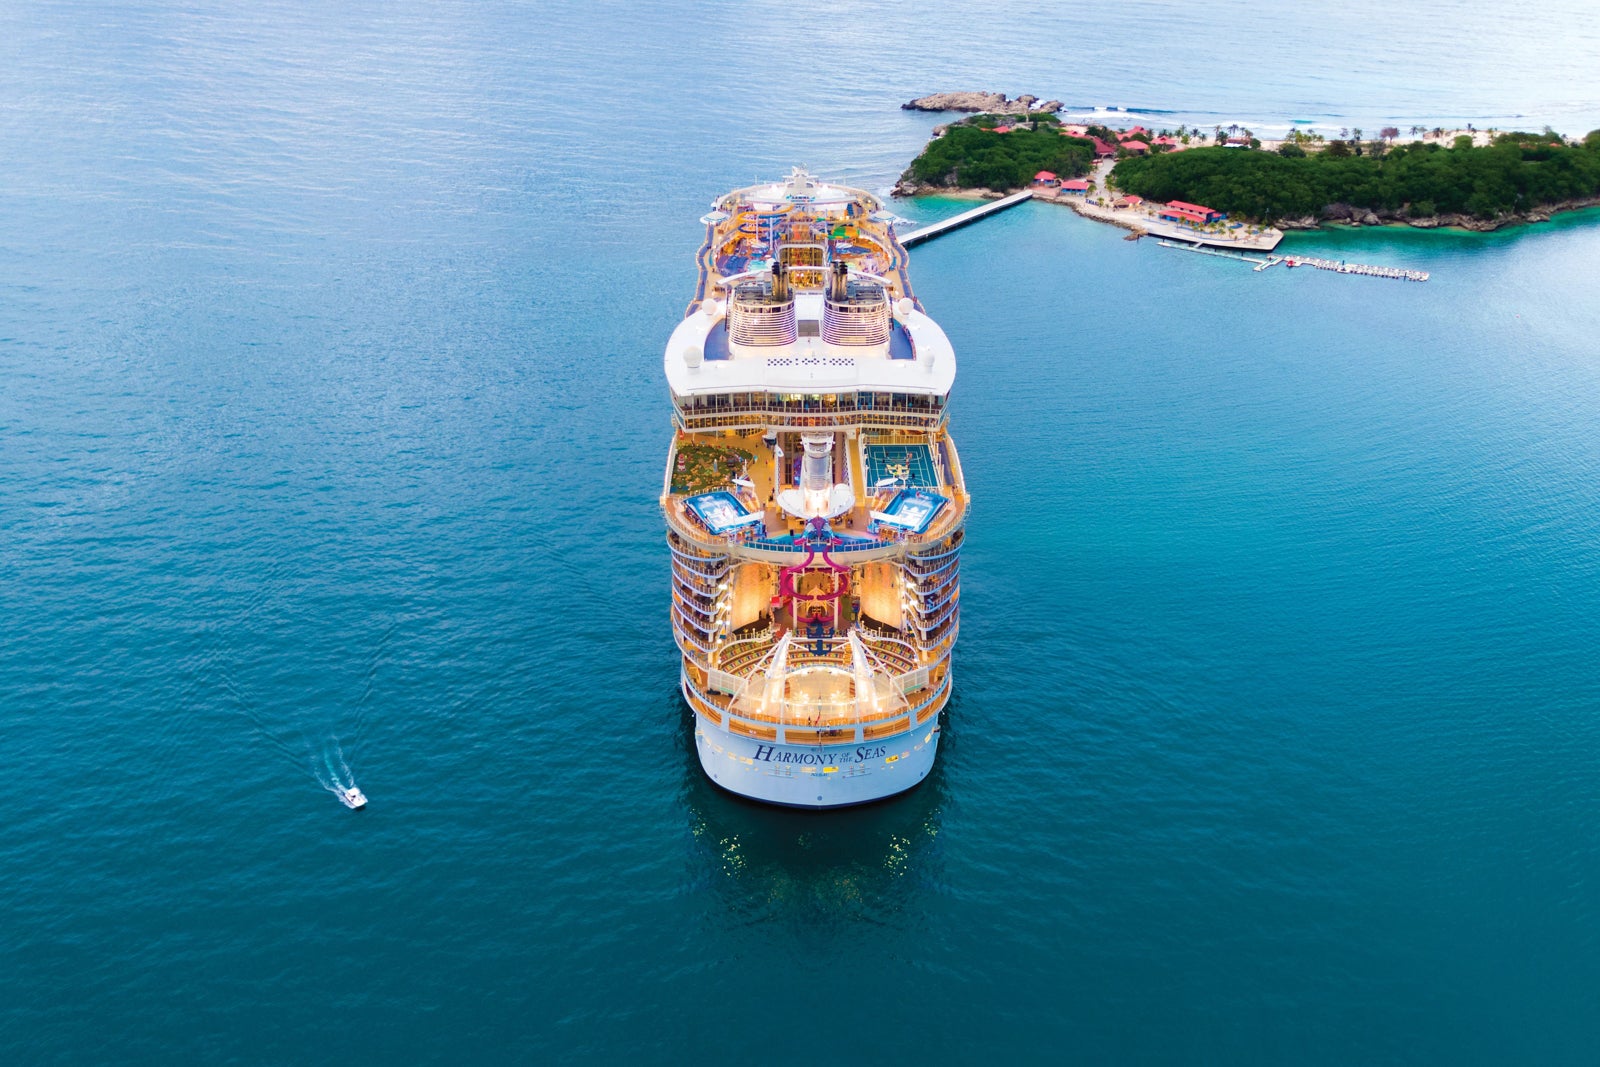 An aerial aft view of Royal Caribbean's Harmony of the Seas cruise ship at anchor in blue water